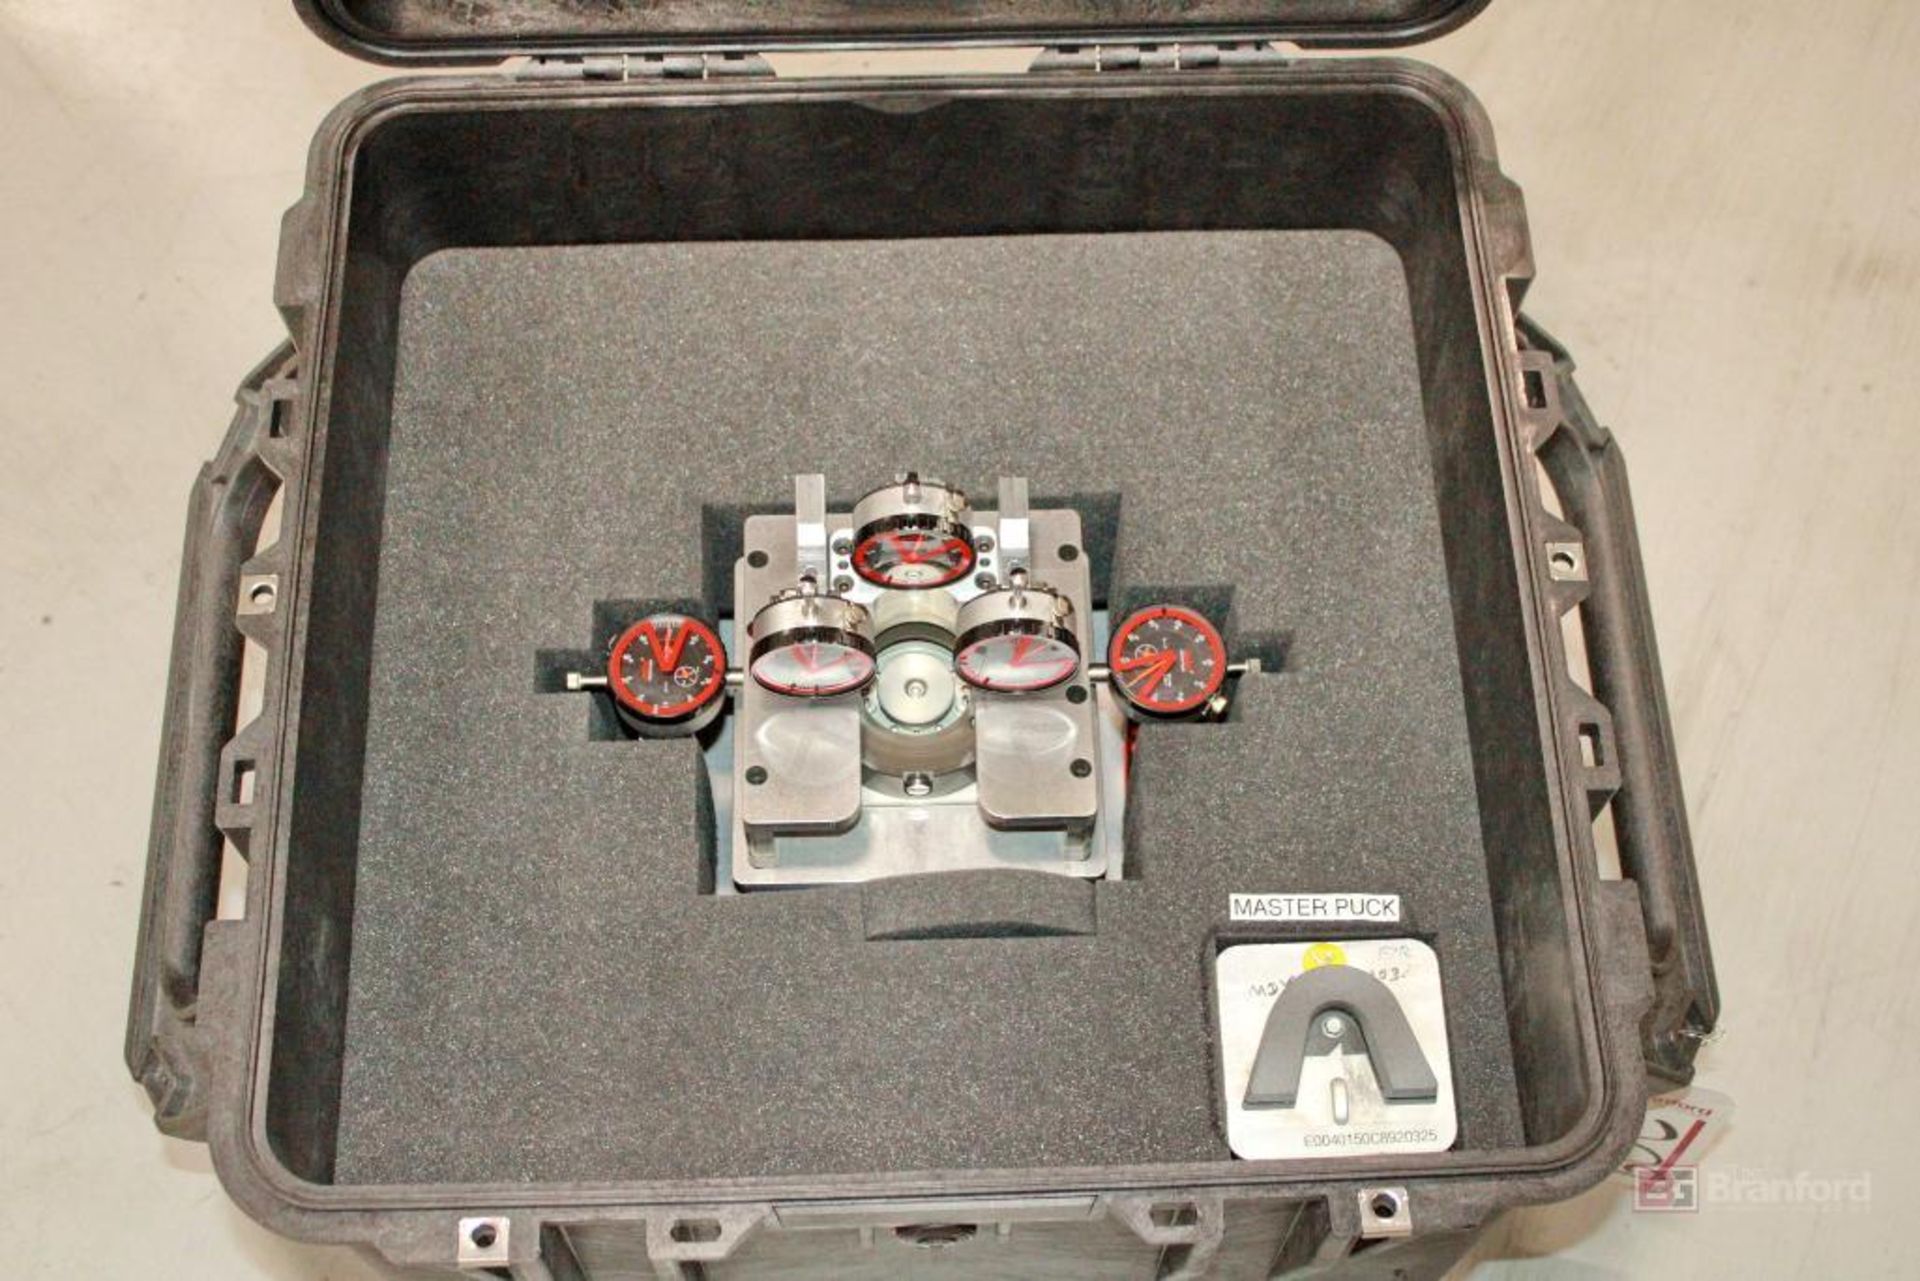 MHC Industrial Supply Laser Alignment Assembly Check Fixture w/ Pelican Case - Image 14 of 15